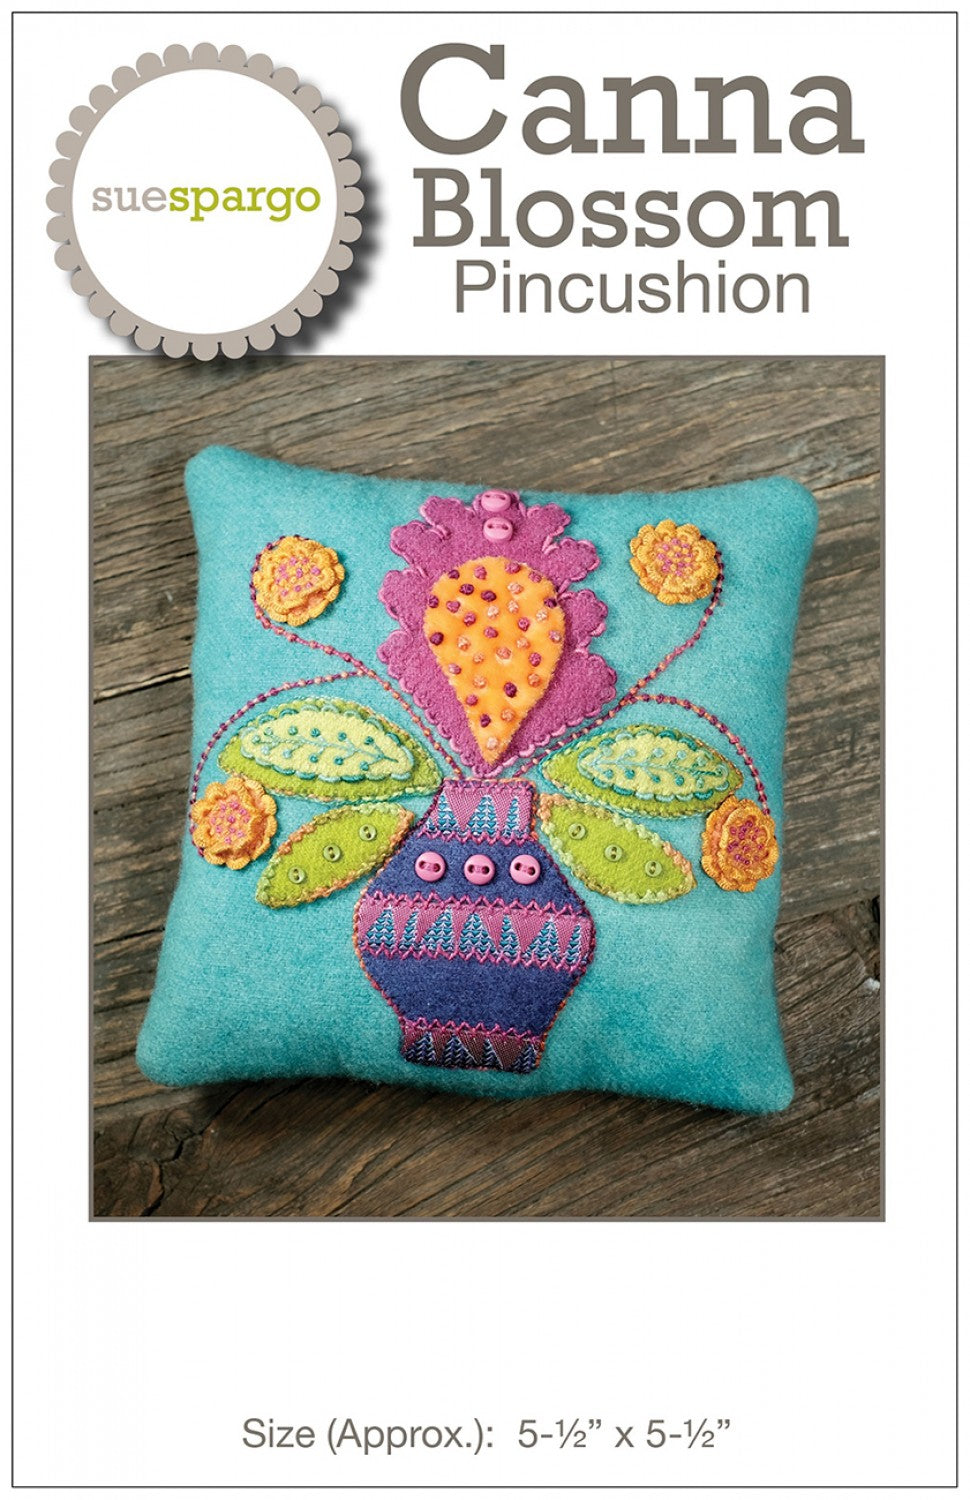 Canna Blossom Pincushion - Applique, Embroidery, and Sewing Pattern by Sue Spargo of Folk Art Quilts